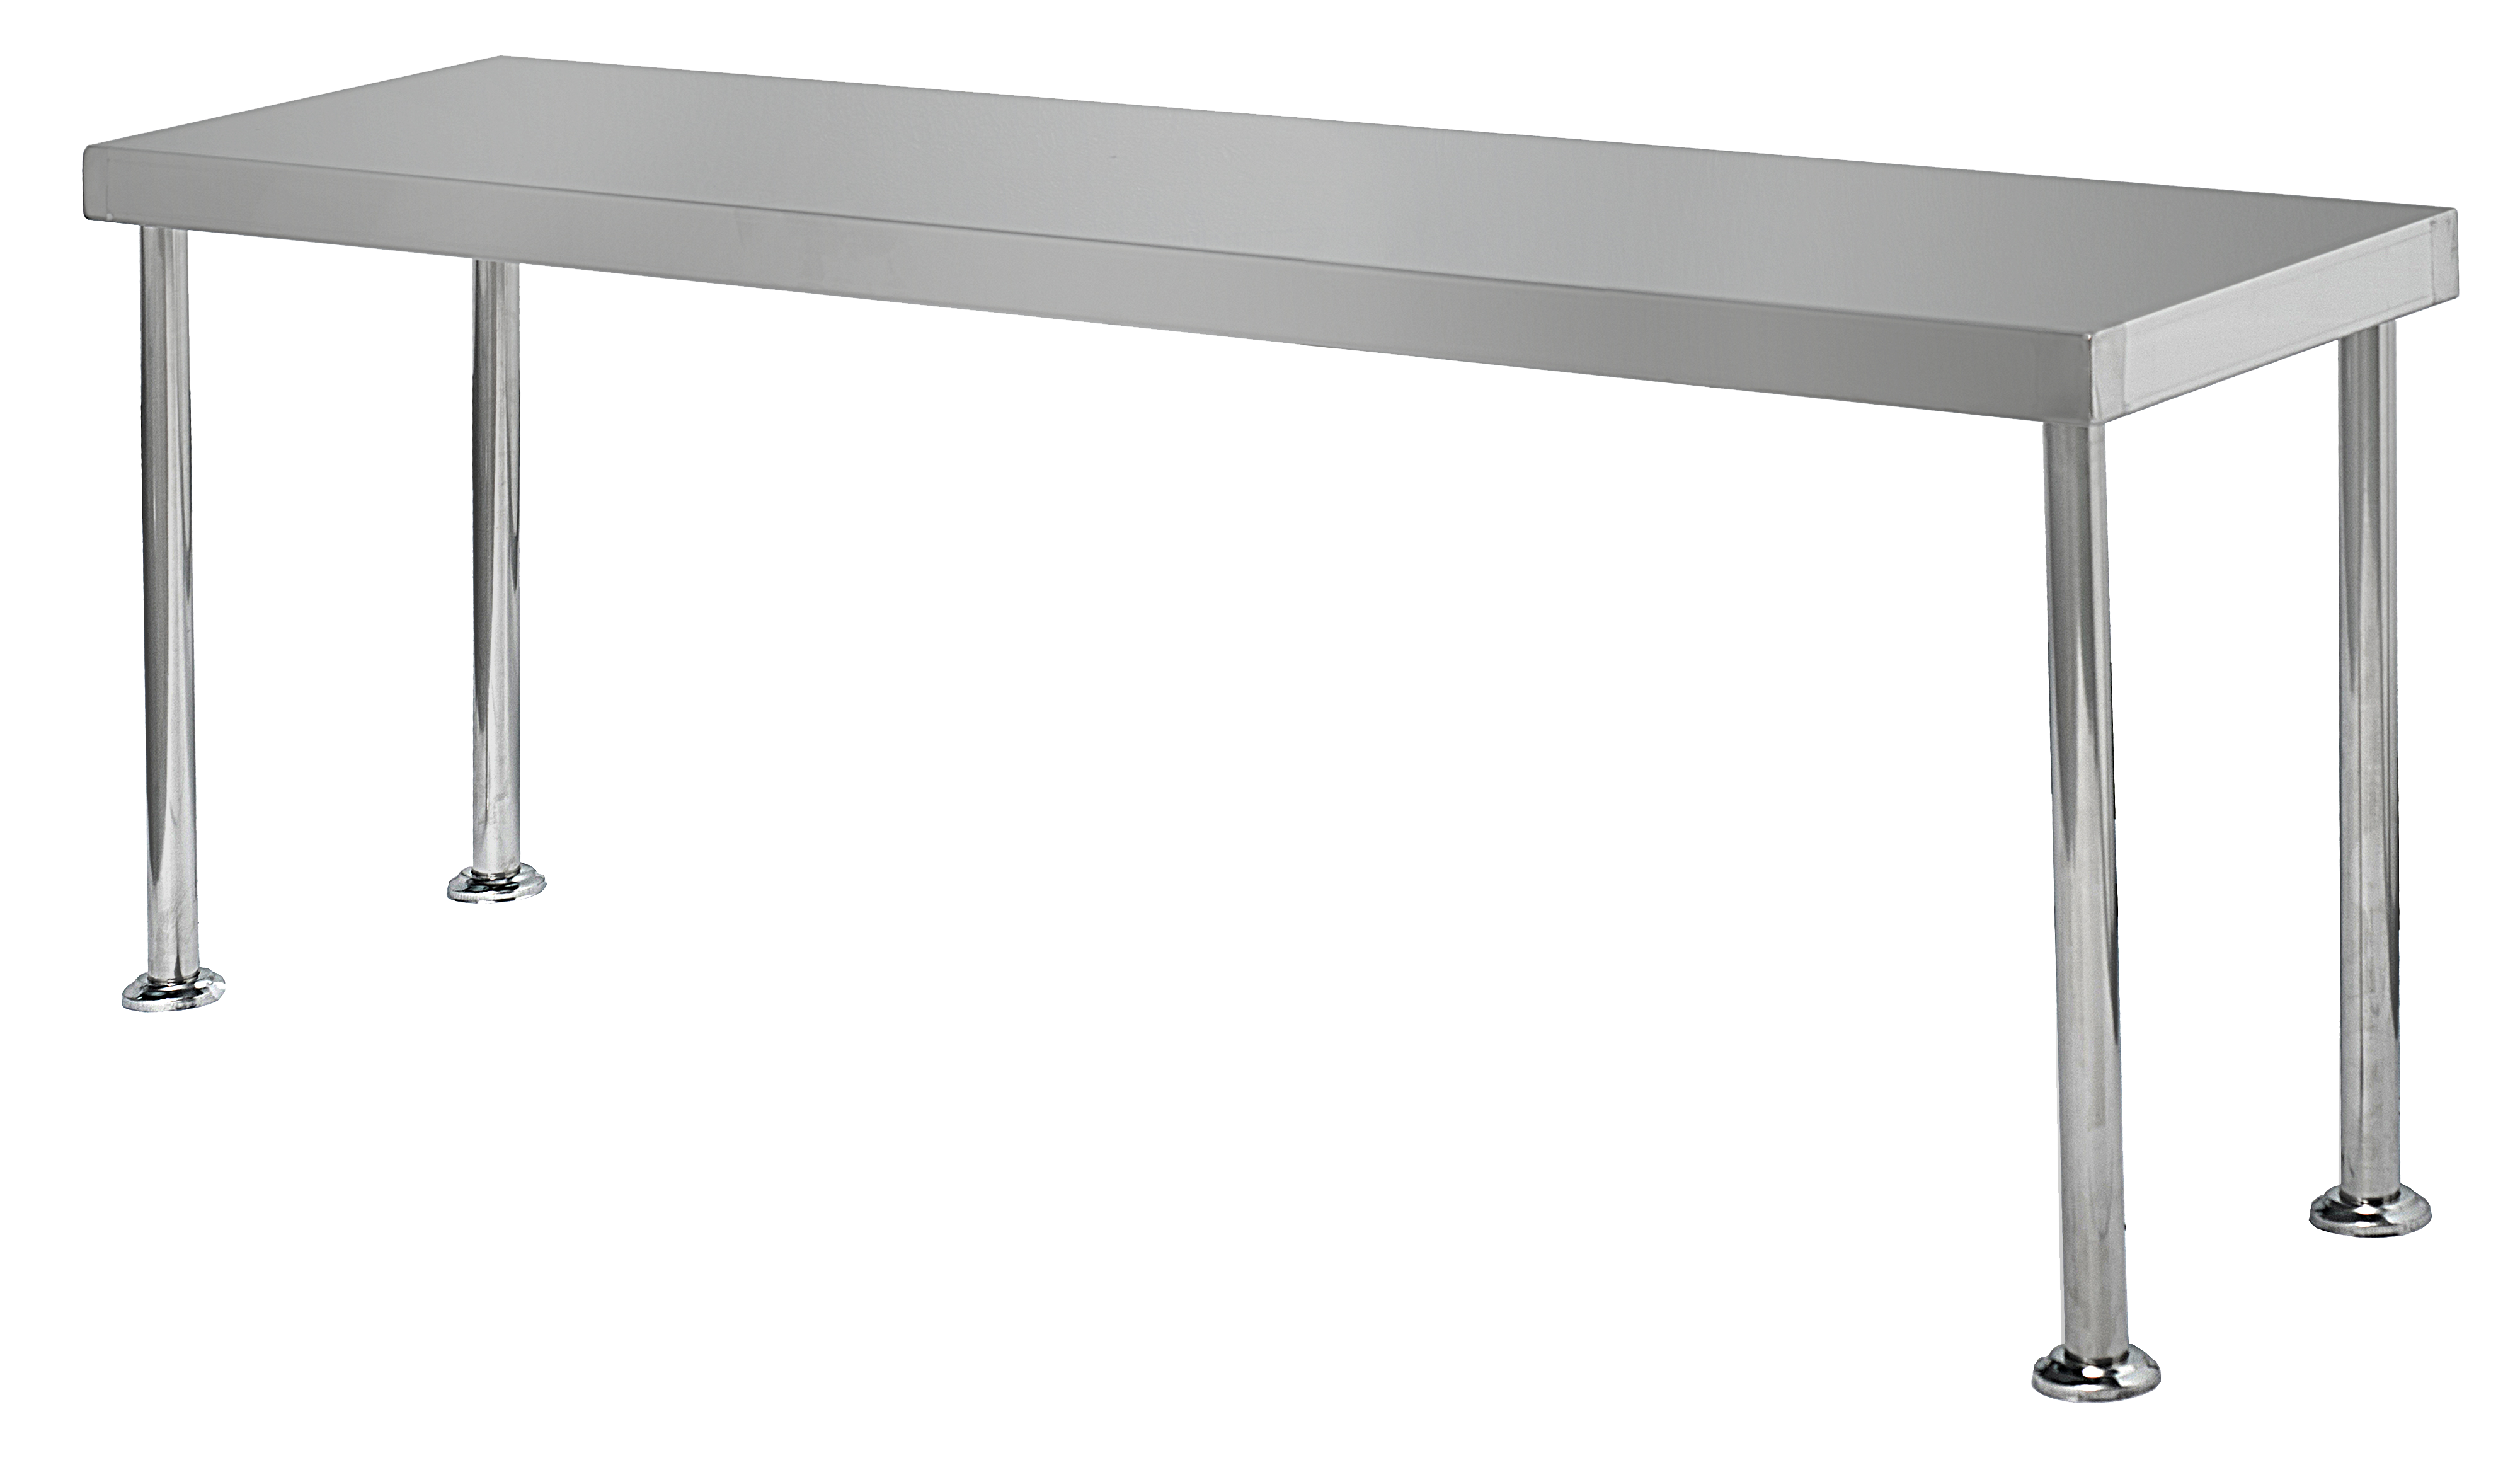 Simply Stainless 1200mm wide Bench Over Shelf SS12.1200